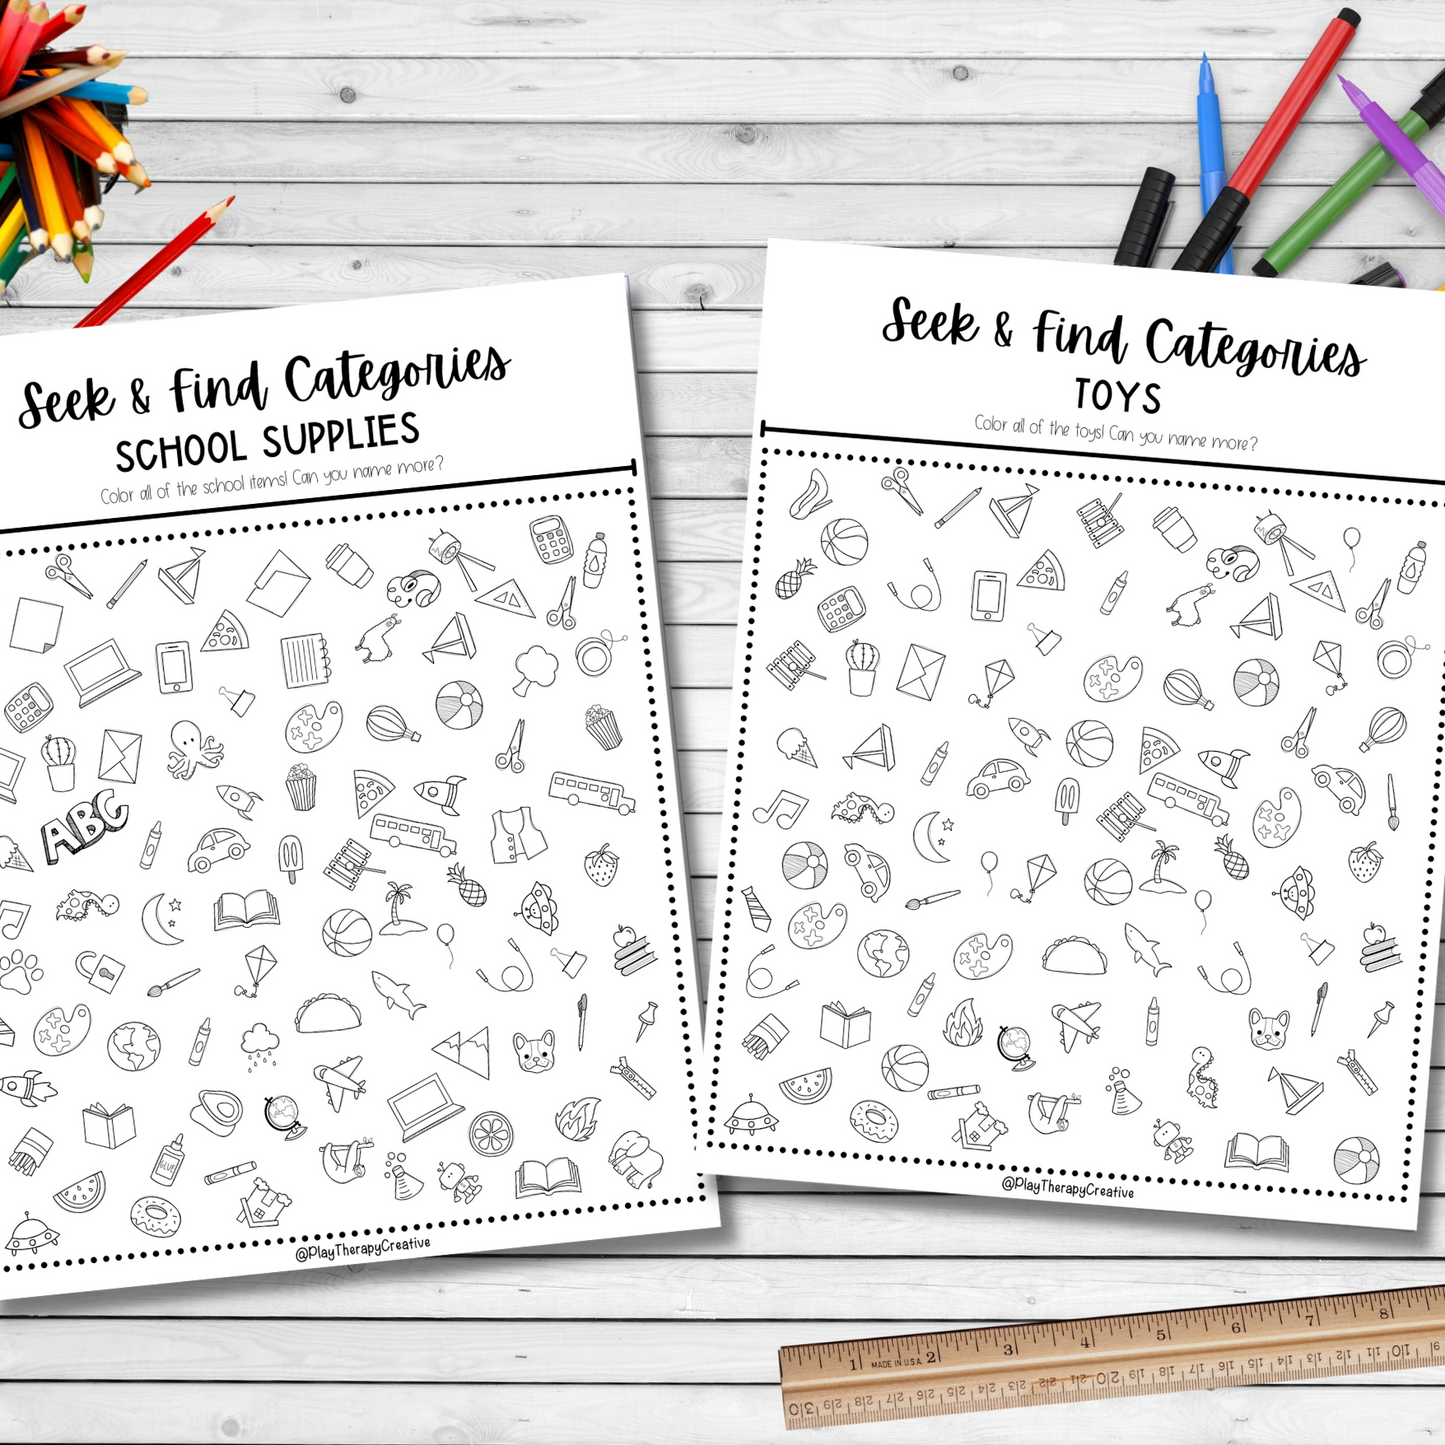 Seek & Find Categories Coloring Pages for Speech & Language Therapy